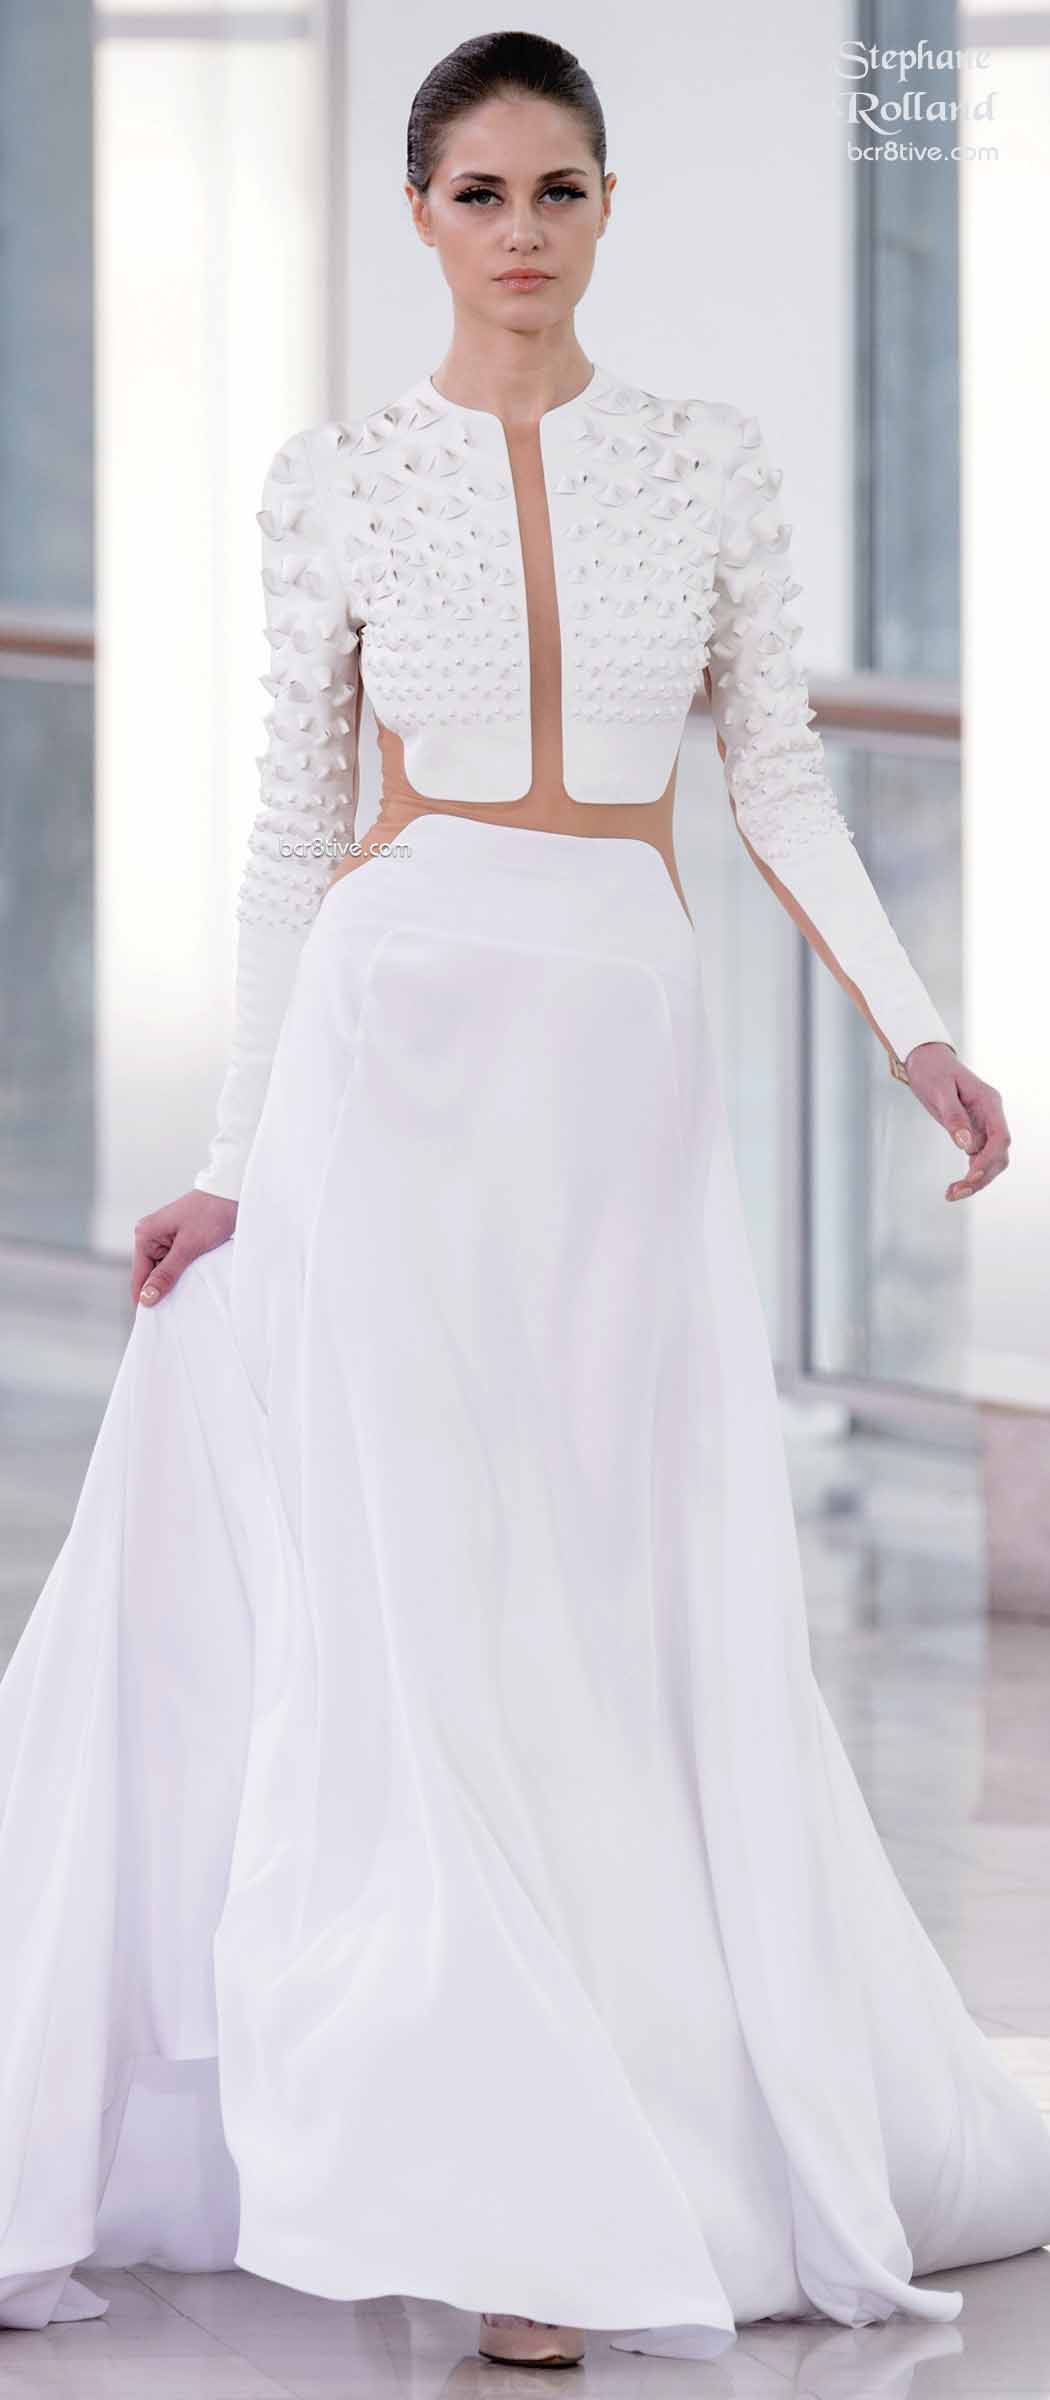 Stéphane Rolland Couture Spring 2015